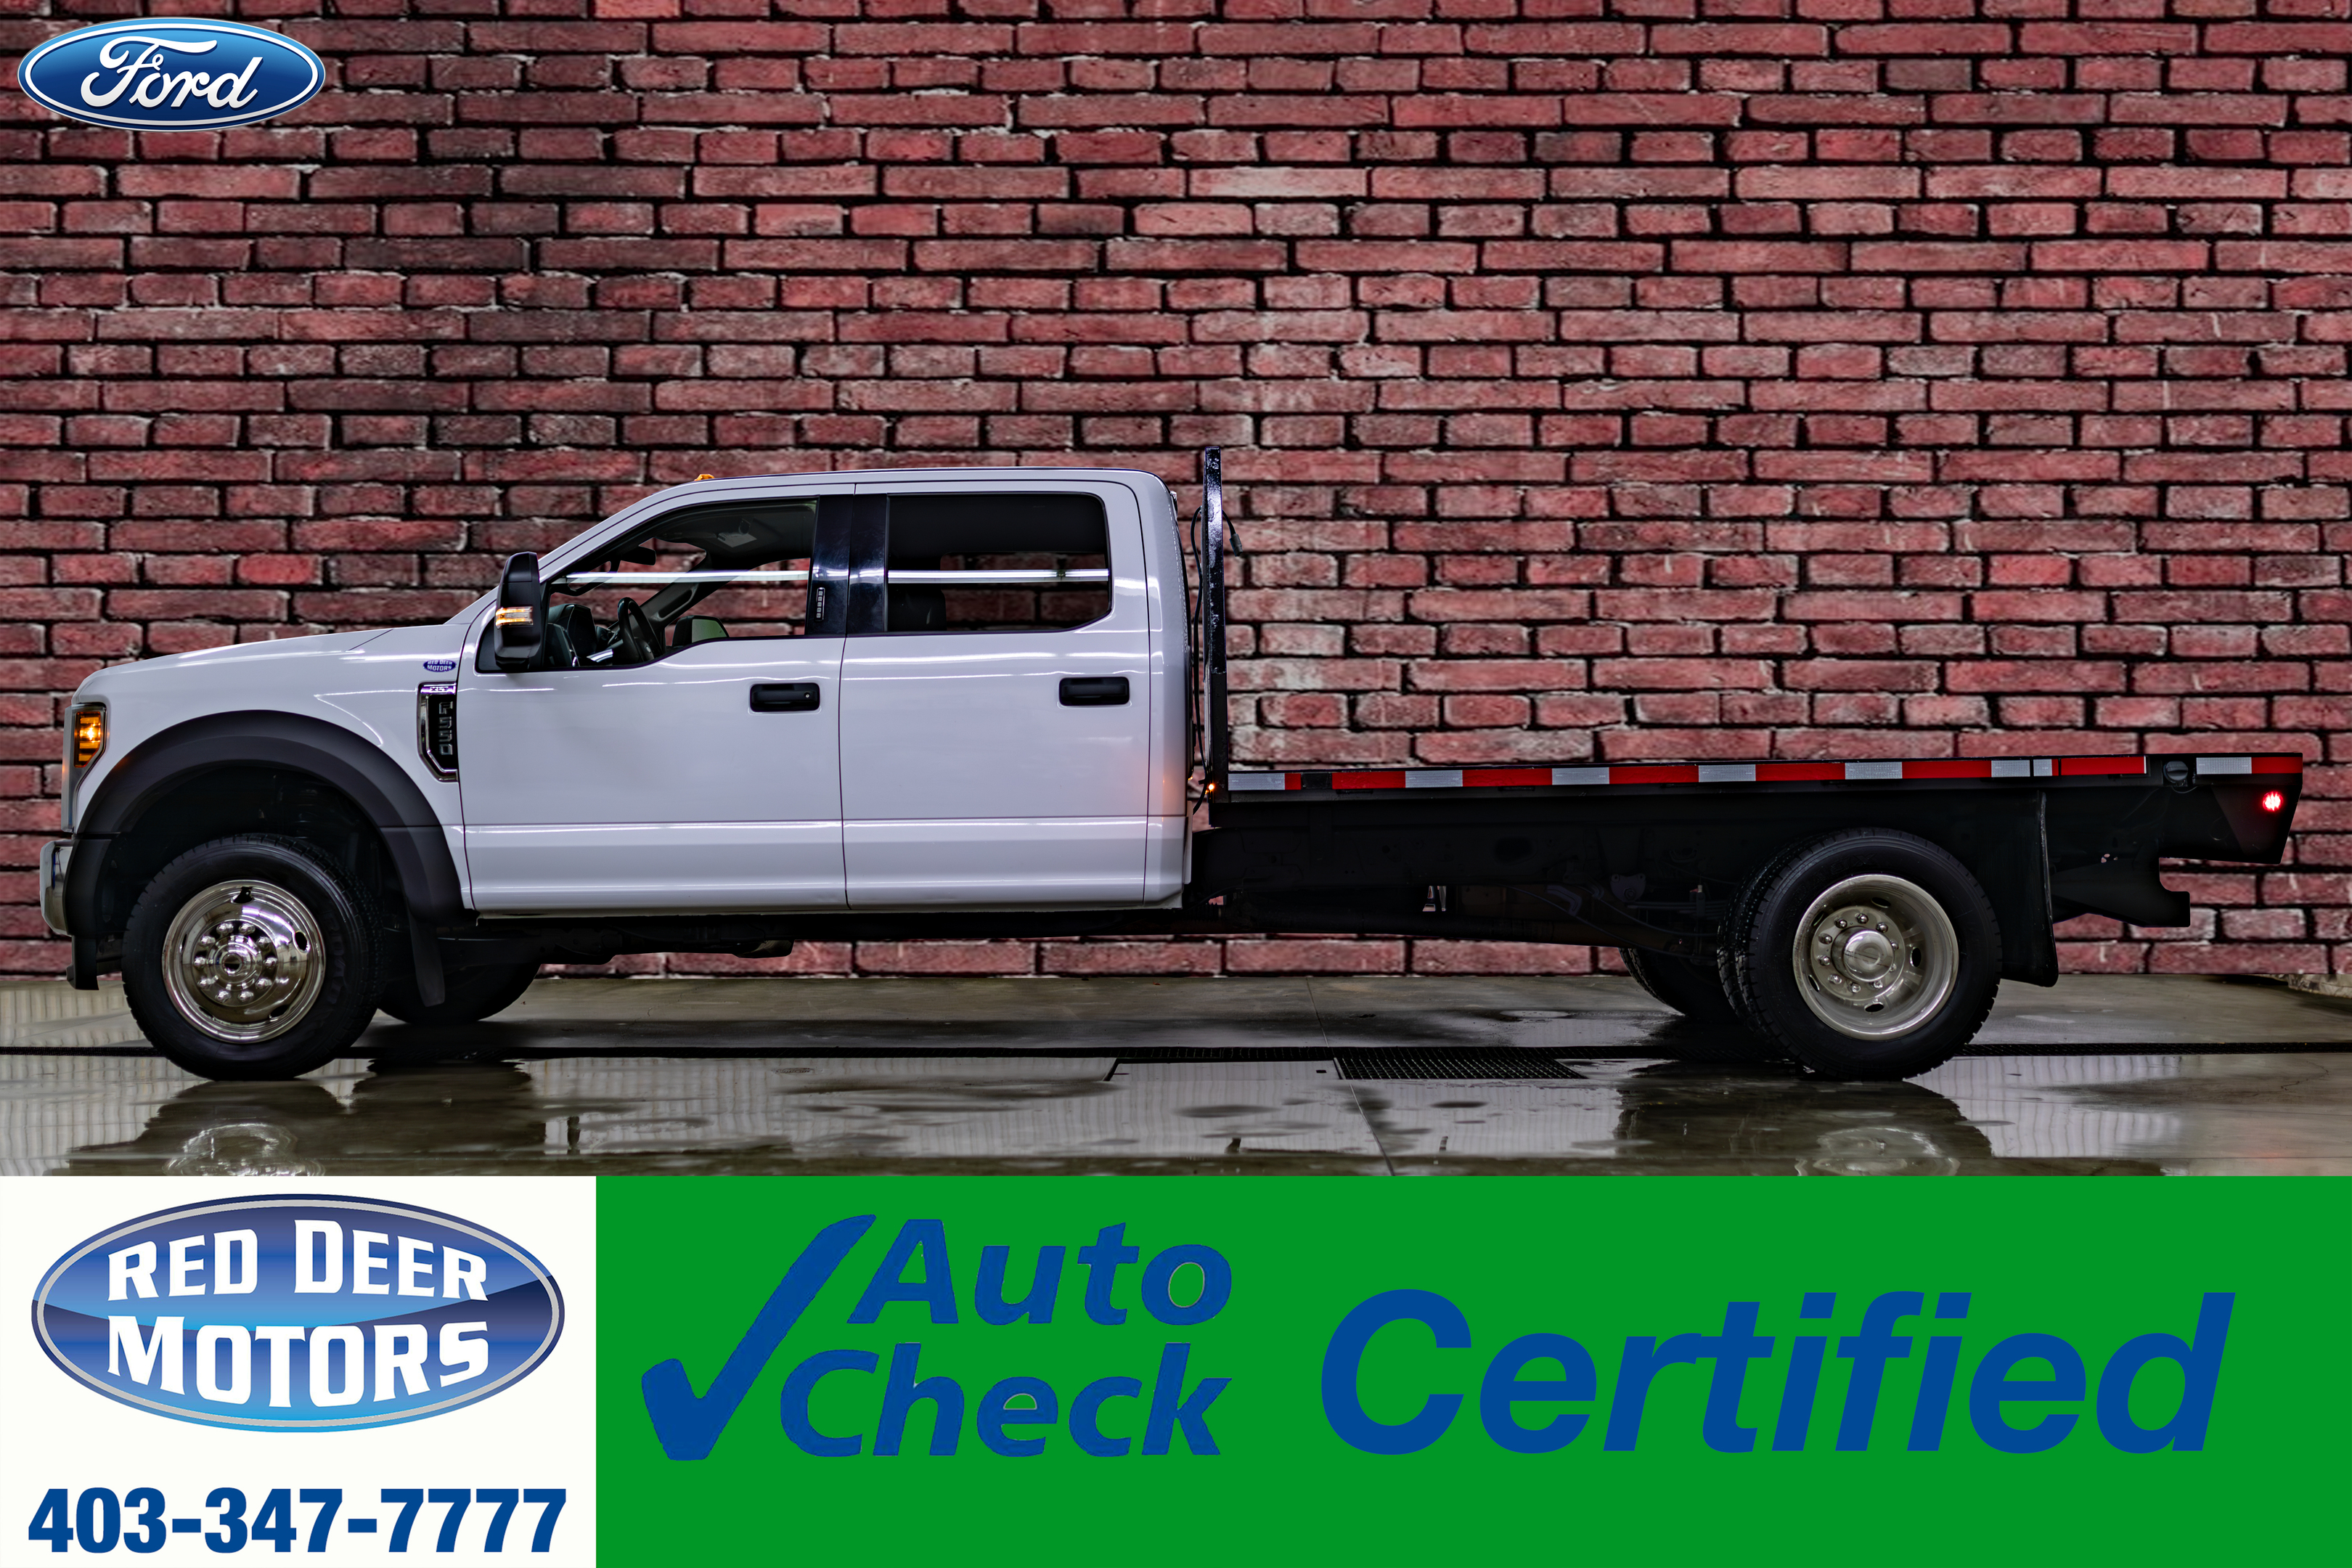 2019 Ford F-550 4x4 Crew Cab XLT Dually Deck PSeat